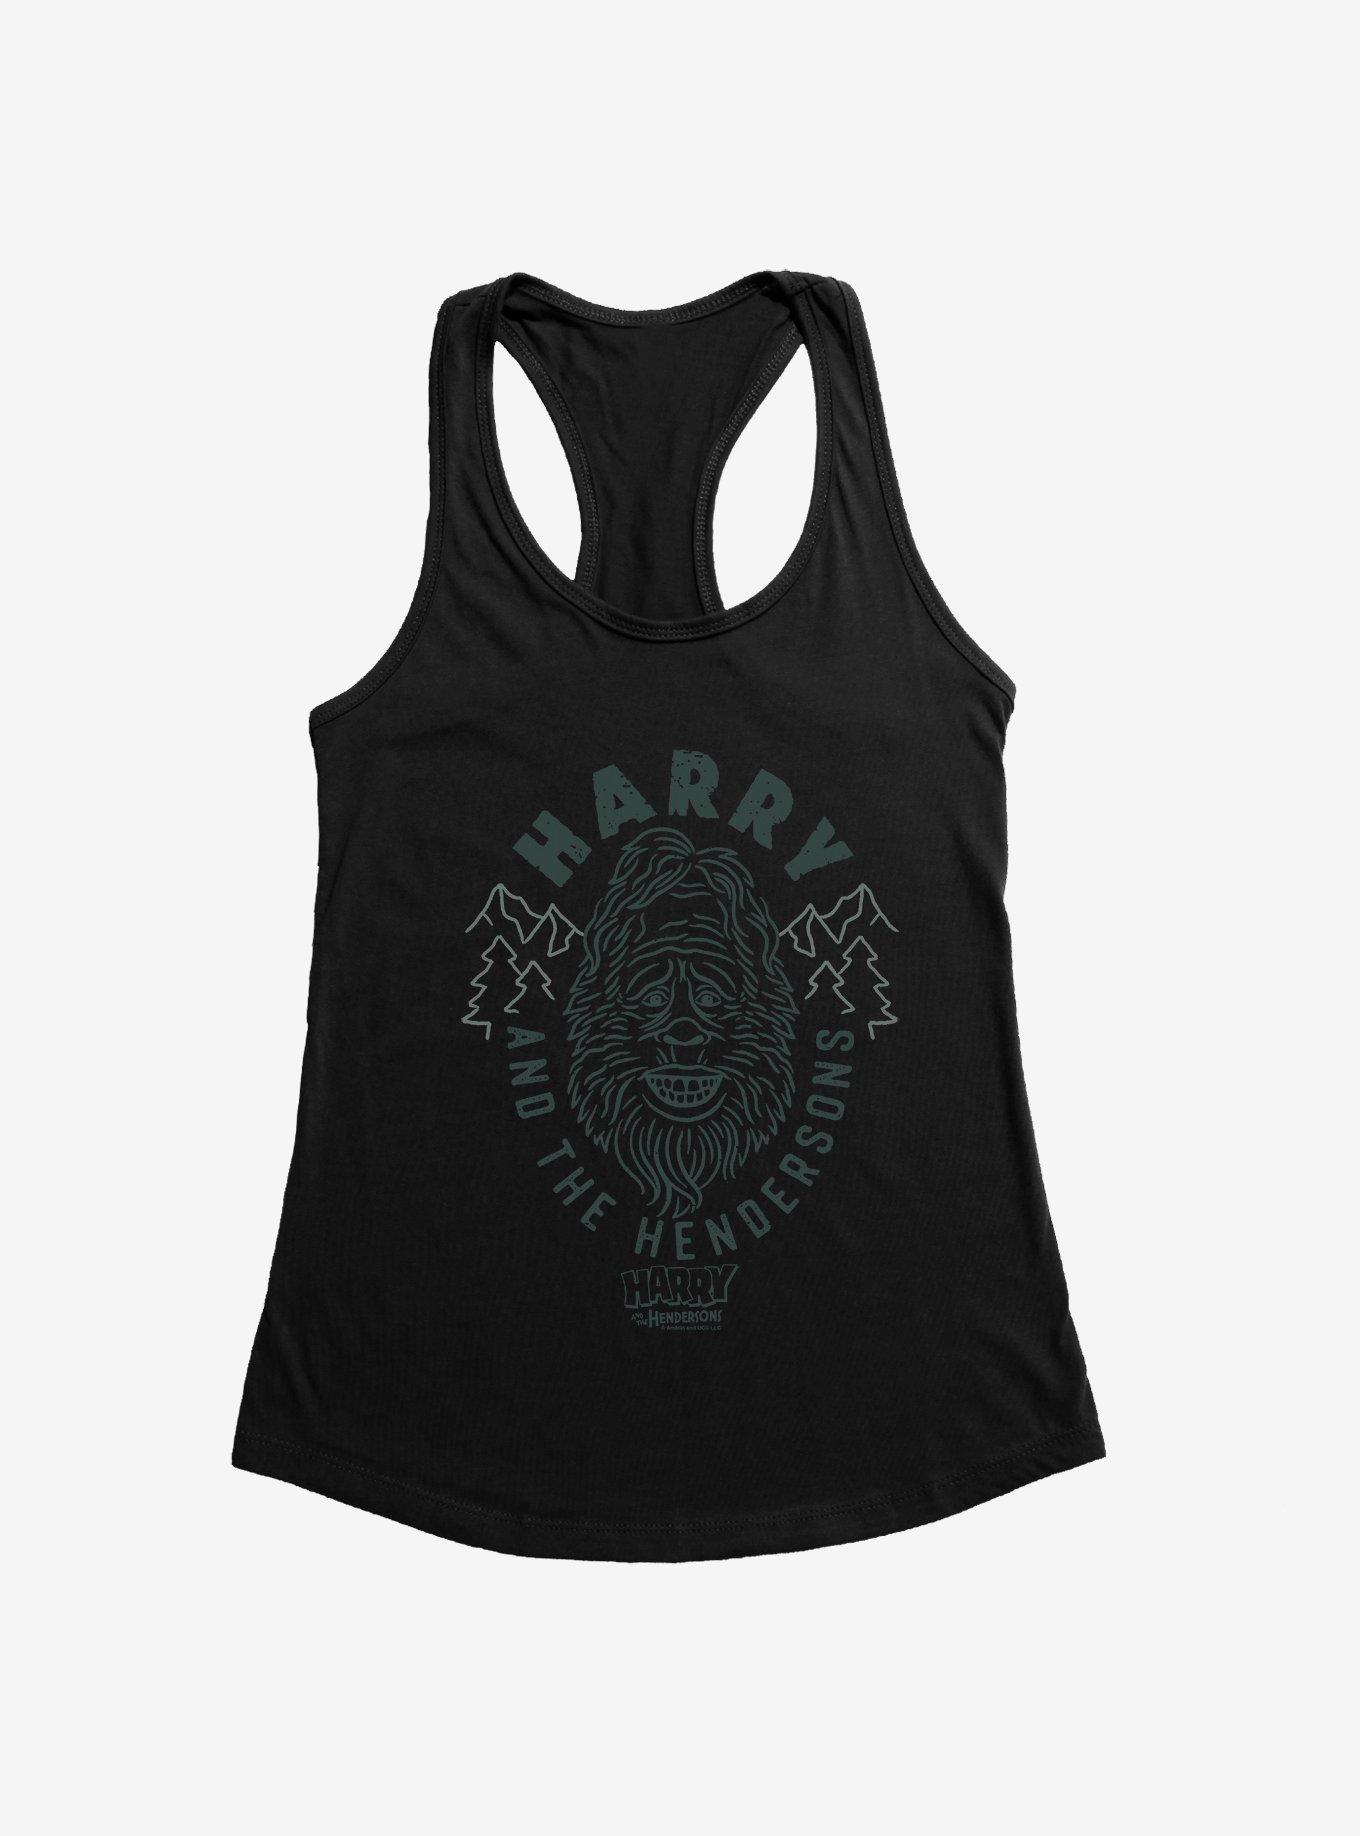 Harry And The Hendersons Line Portrait Girls Tank